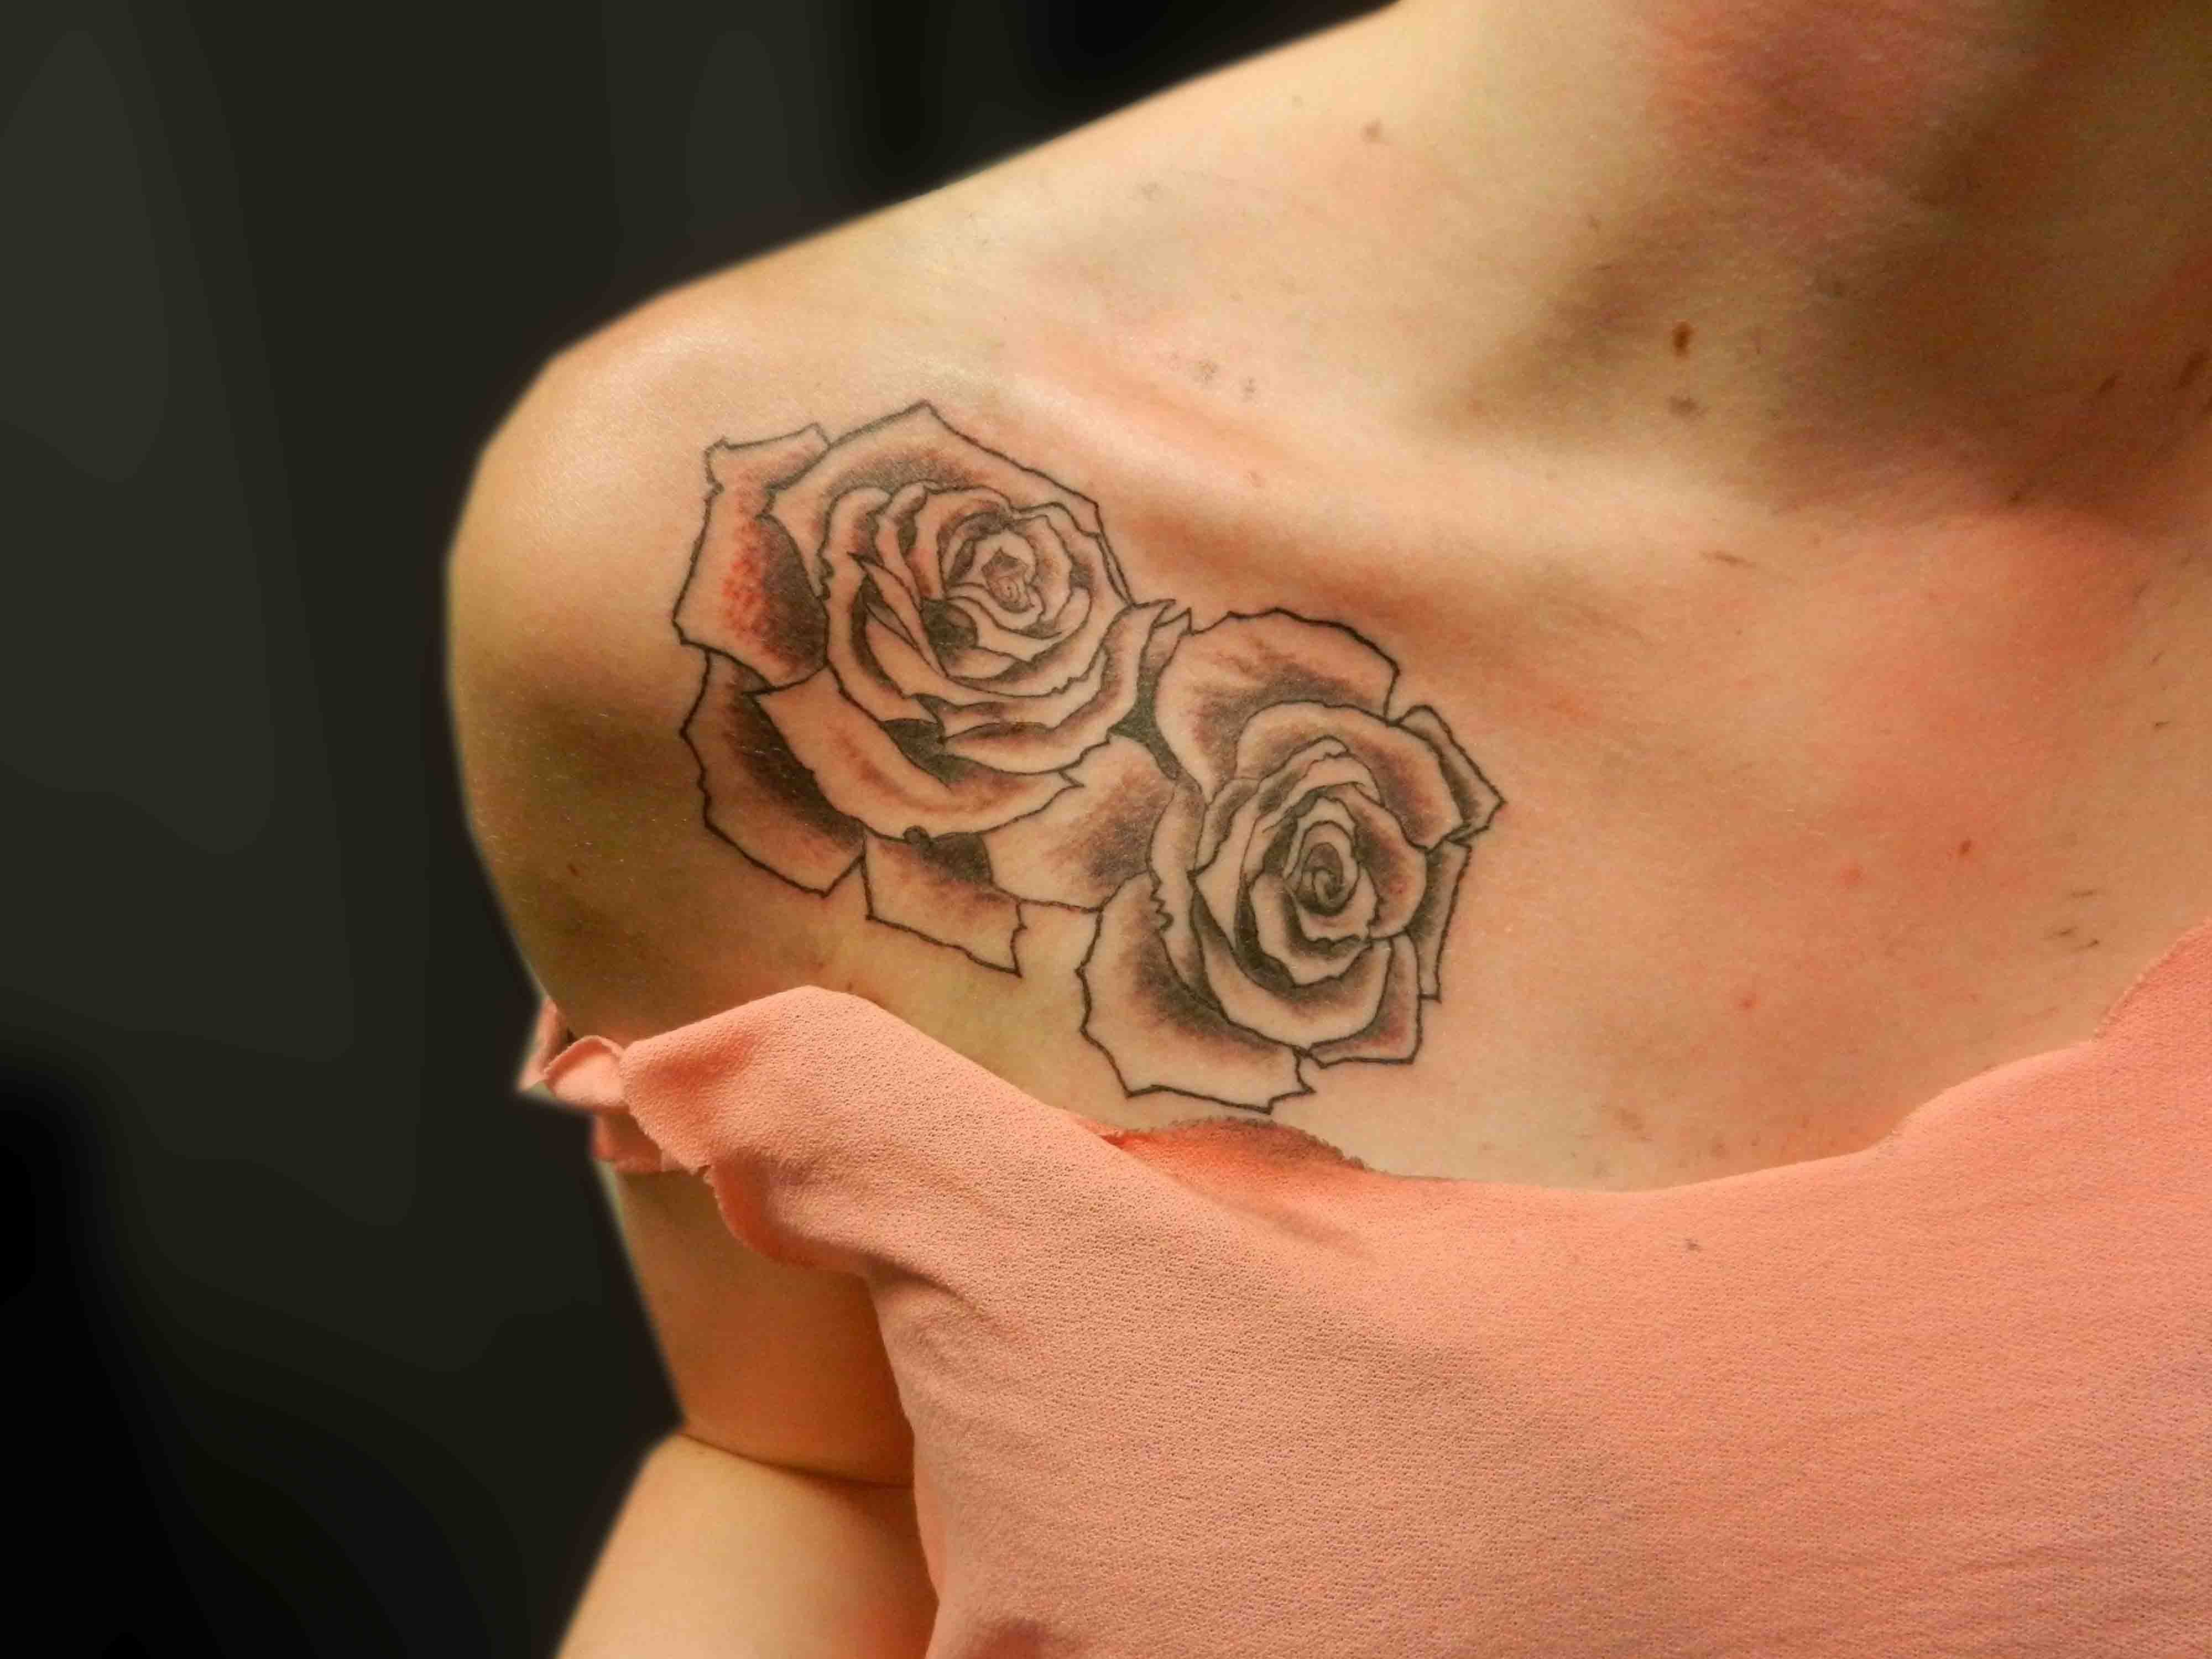 Front Shoulder Tattoo For Women Old School Roses Roses Flower within dimensions 4000 X 3000